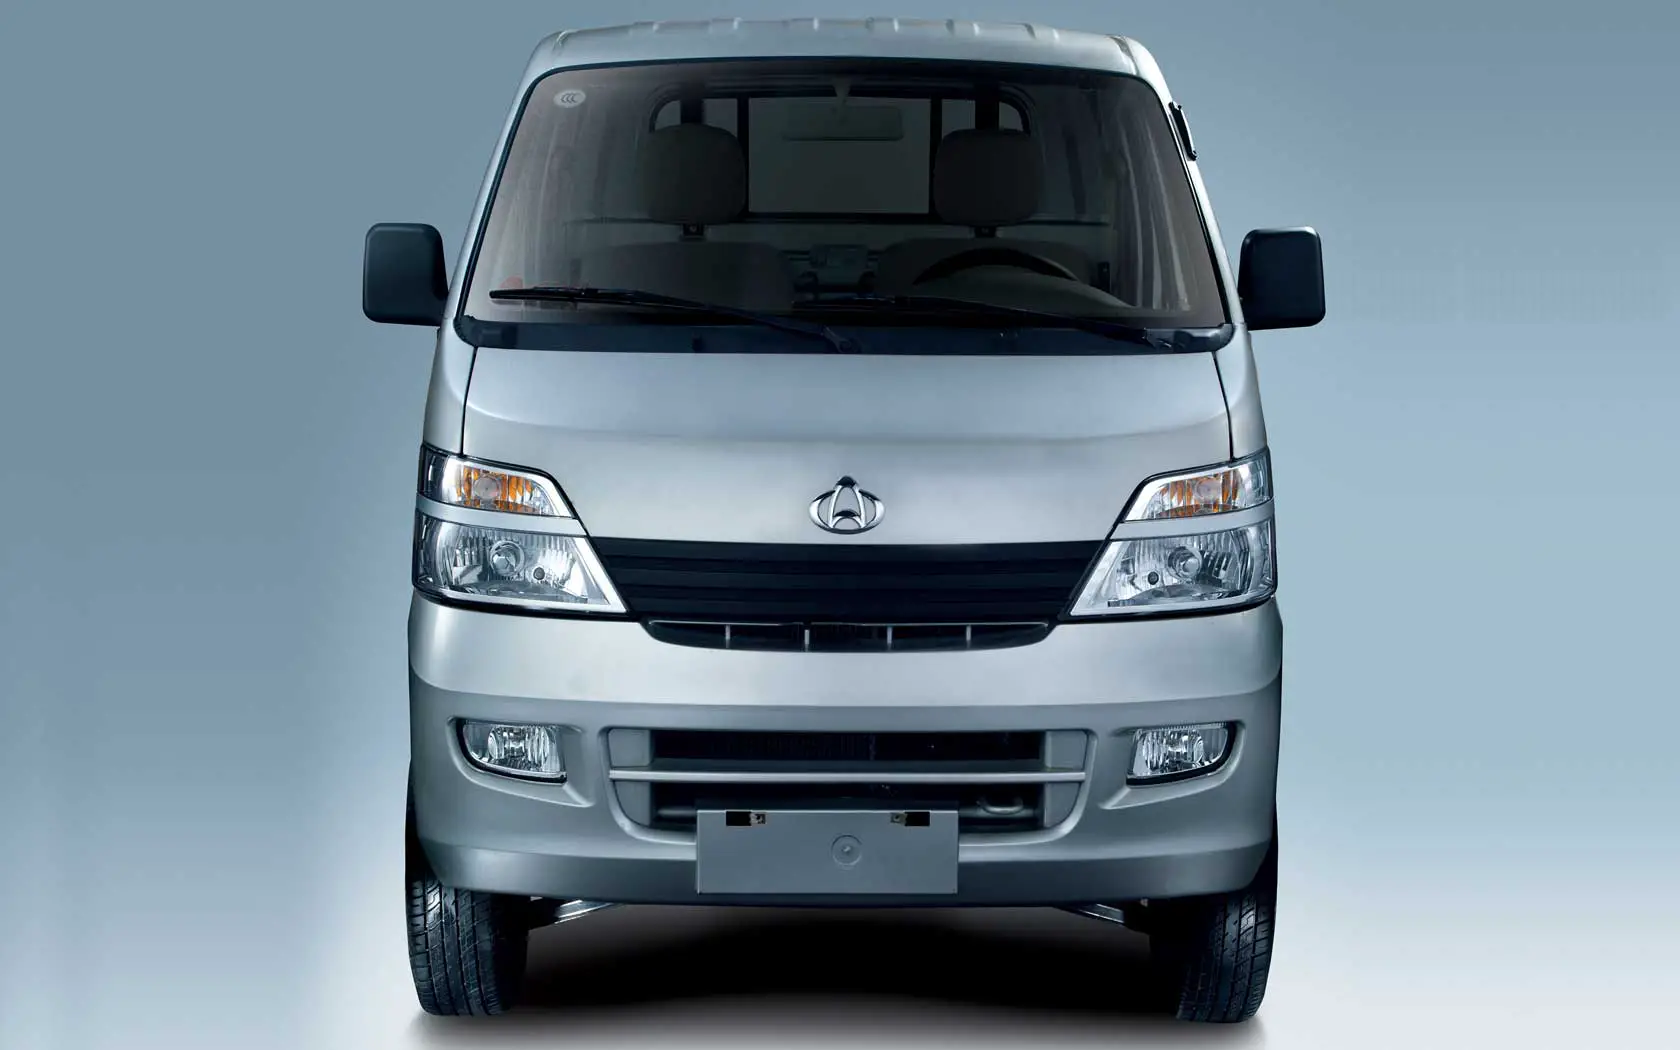 Changan Star Truck Exterior front view